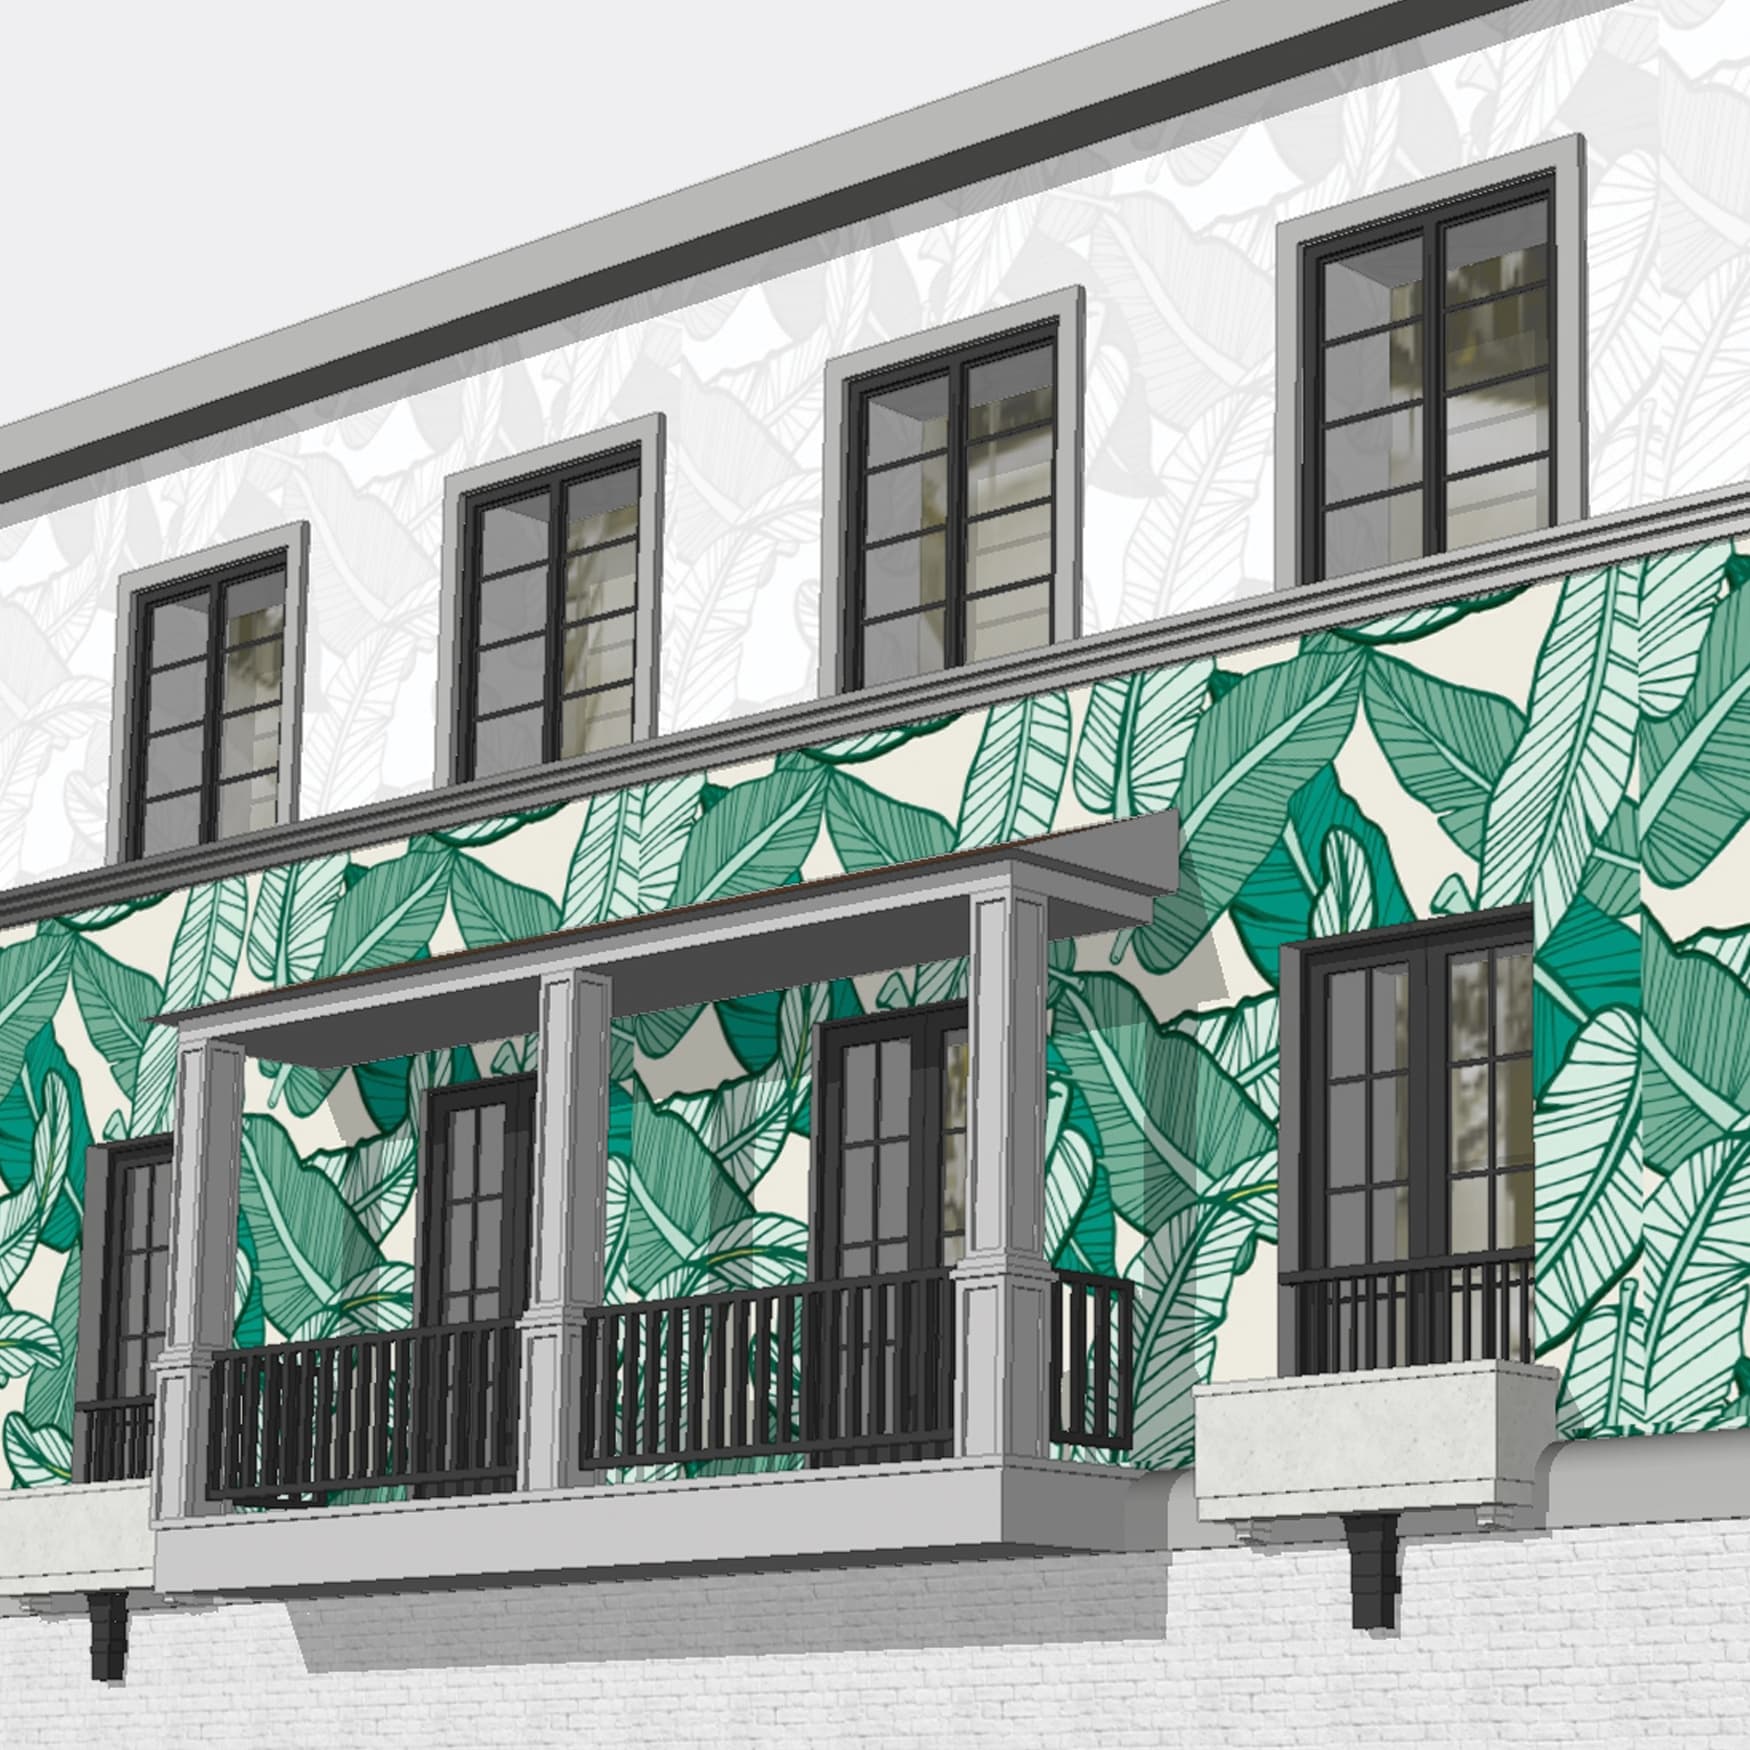 Rosemary Square, a  retail and entertainment center in West Palm Beach, Florida. RSM Design was brought in to create new facade designs, patterning, & mural designs. Architectural Graphic Design.